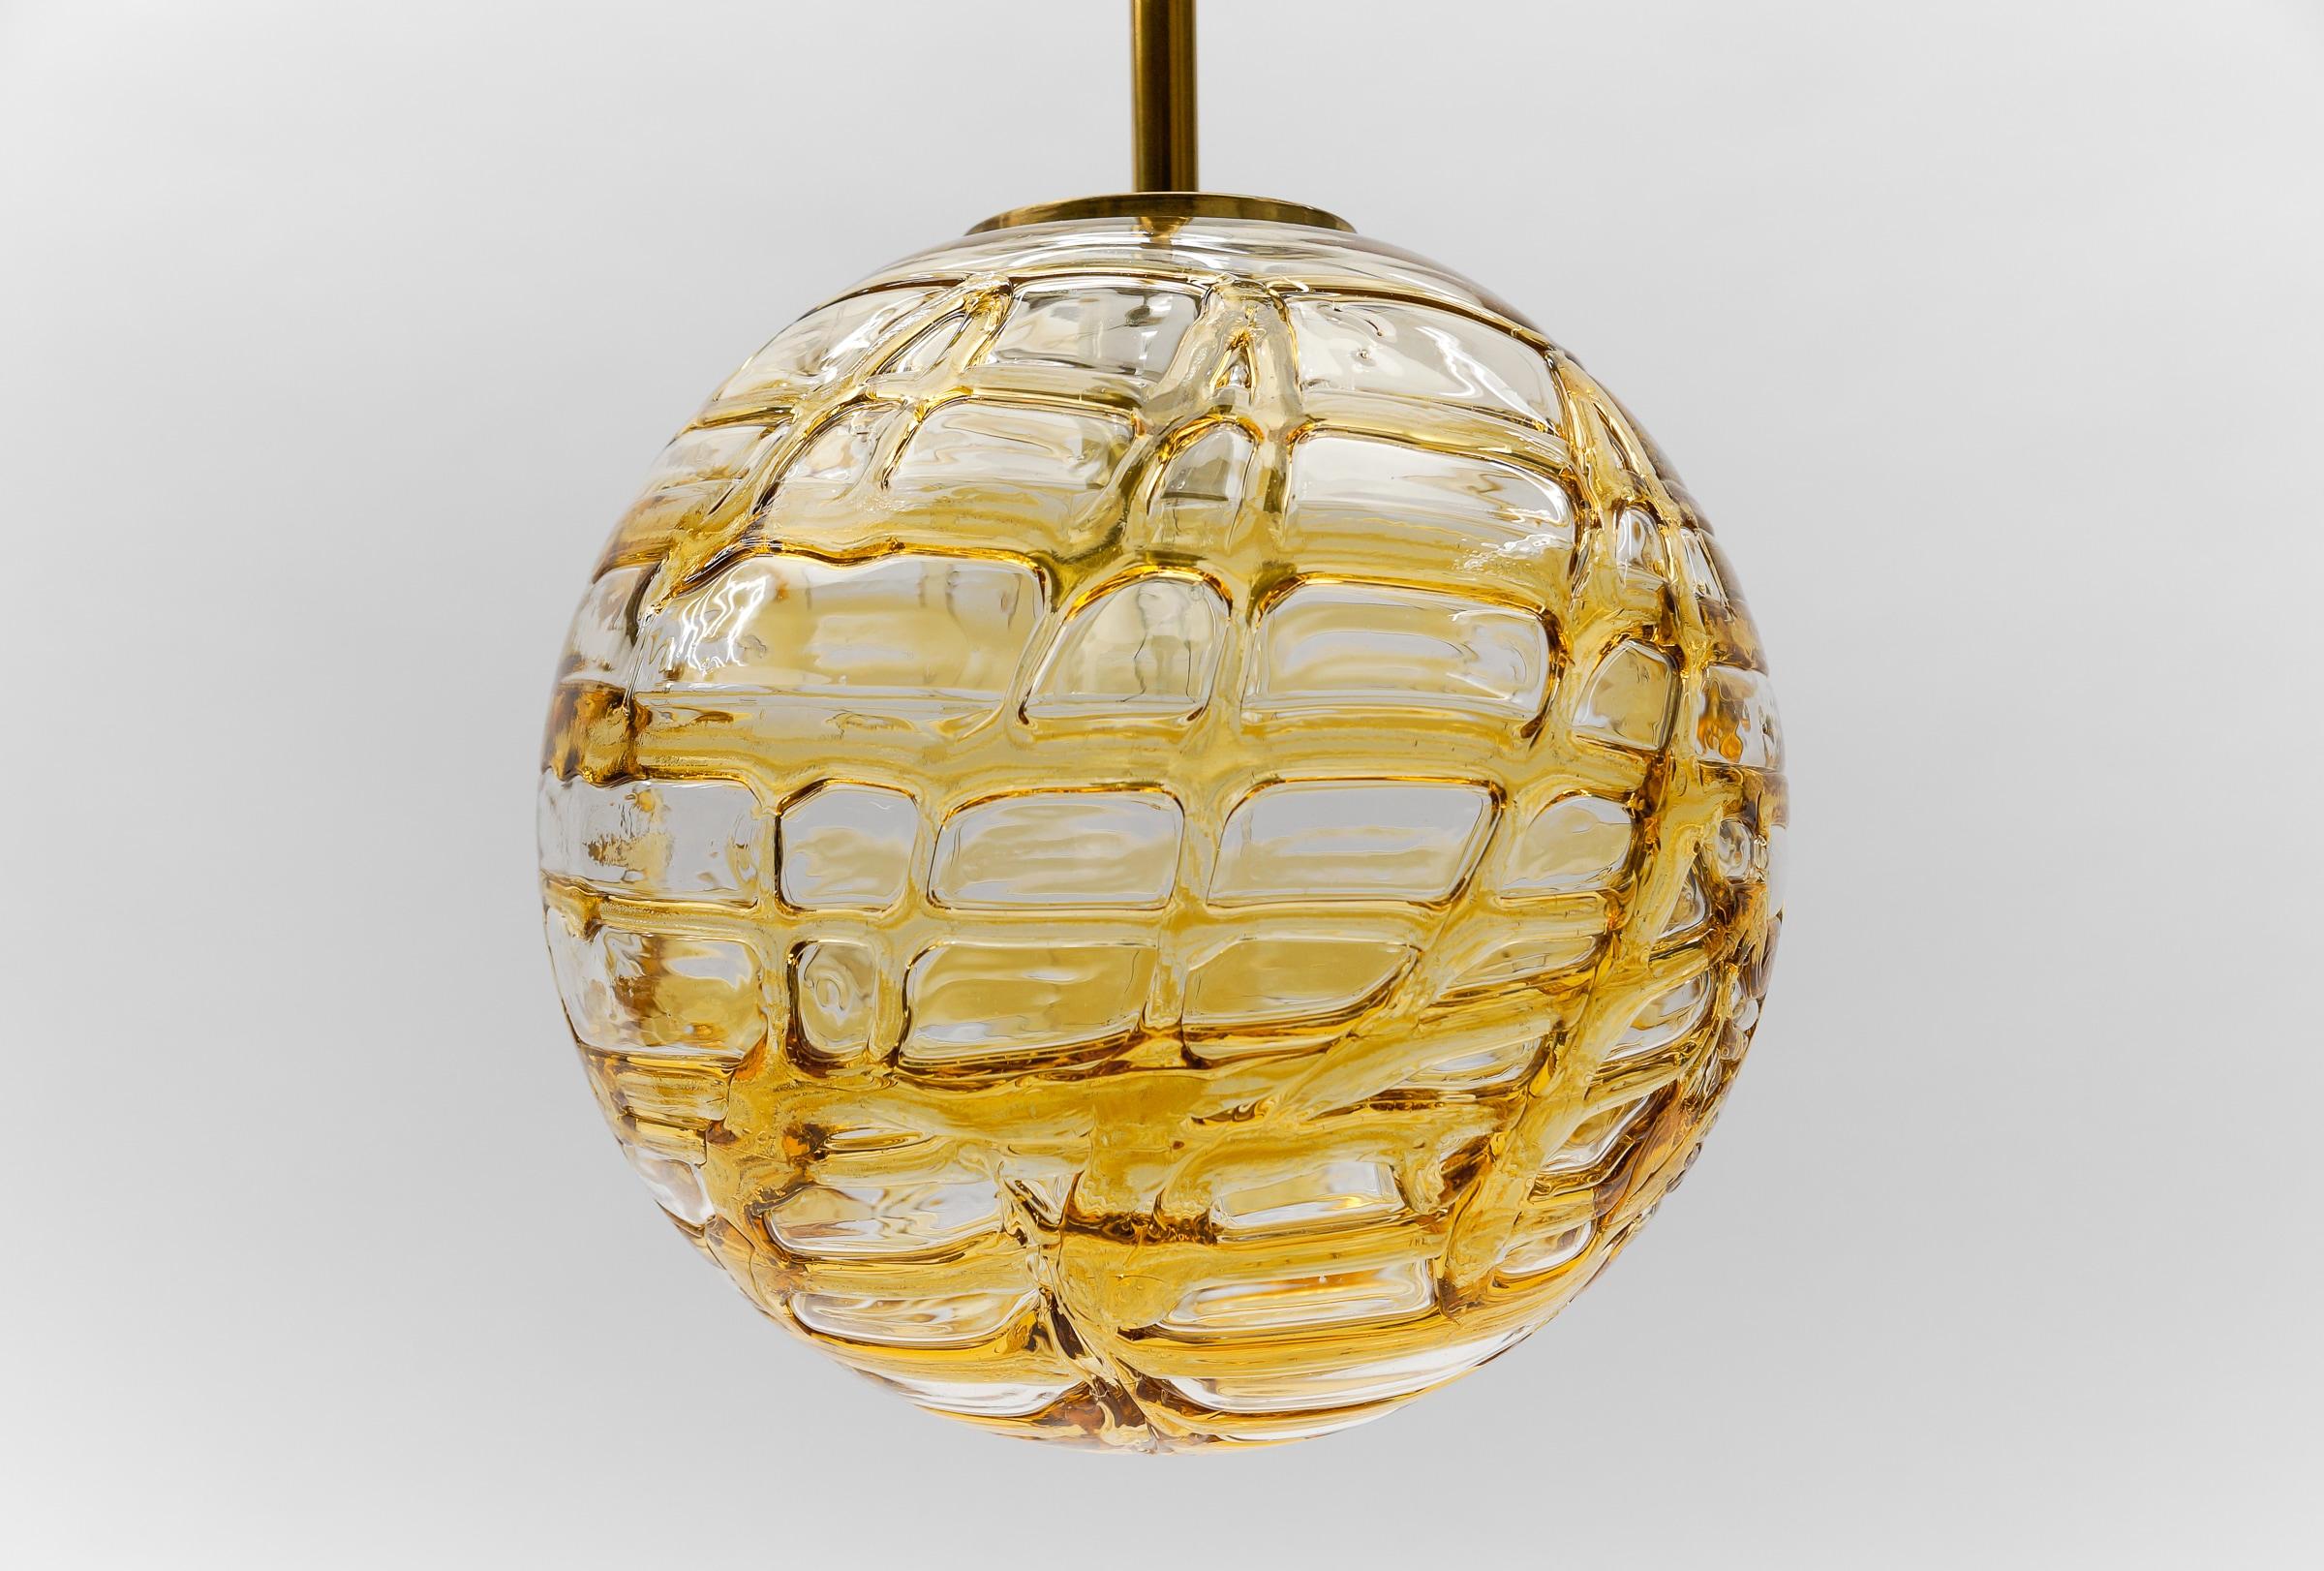 Lovely Yellow Murano Glass Ball Pendant Lamp by Doria, - 1960s Germany For Sale 1